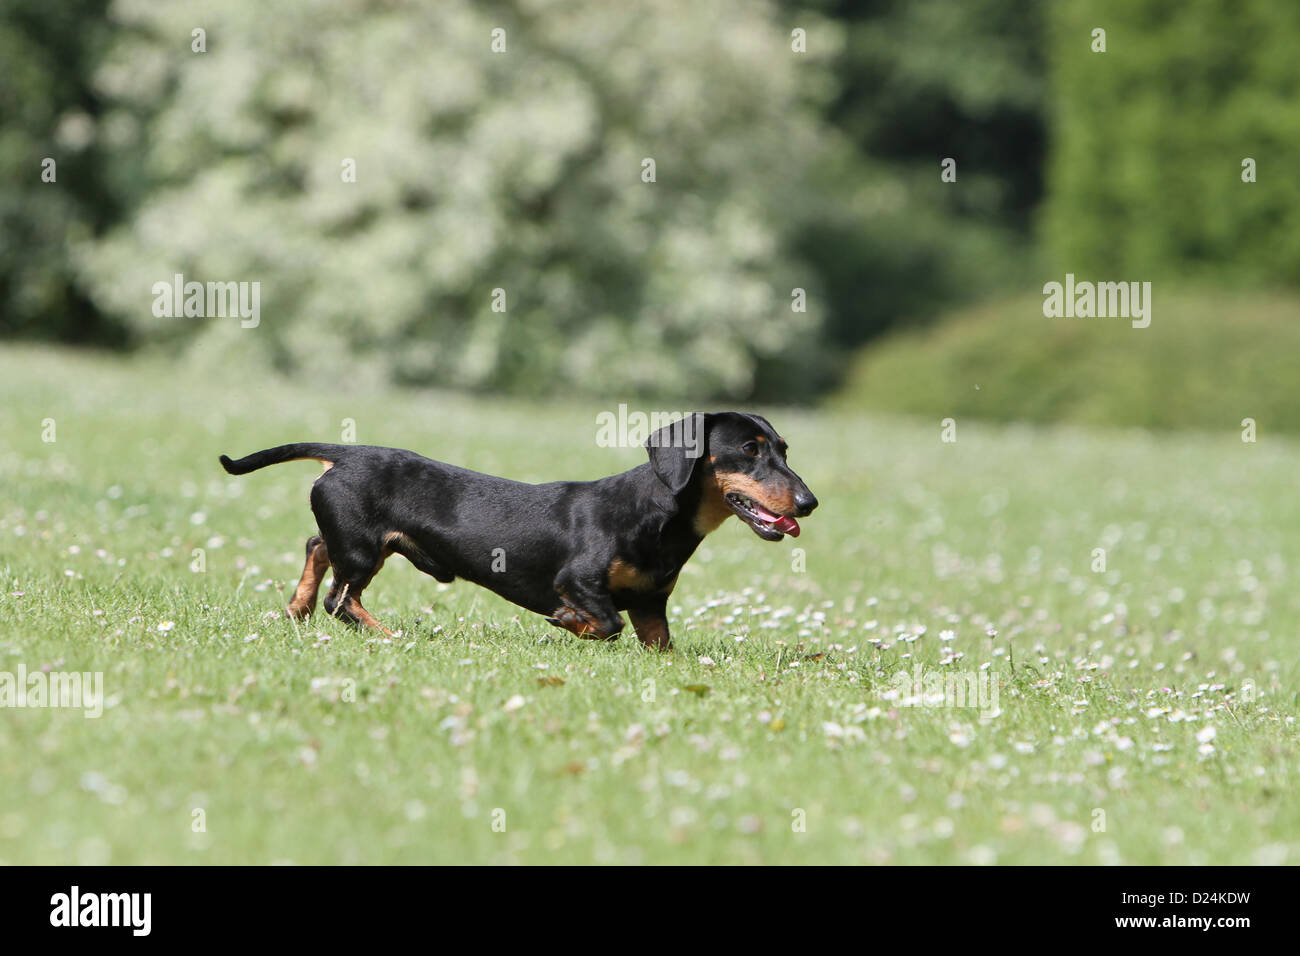 Dog Dachshund /  Dackel / Teckel  shorthaired adult (black and tan) running in the grass Stock Photo